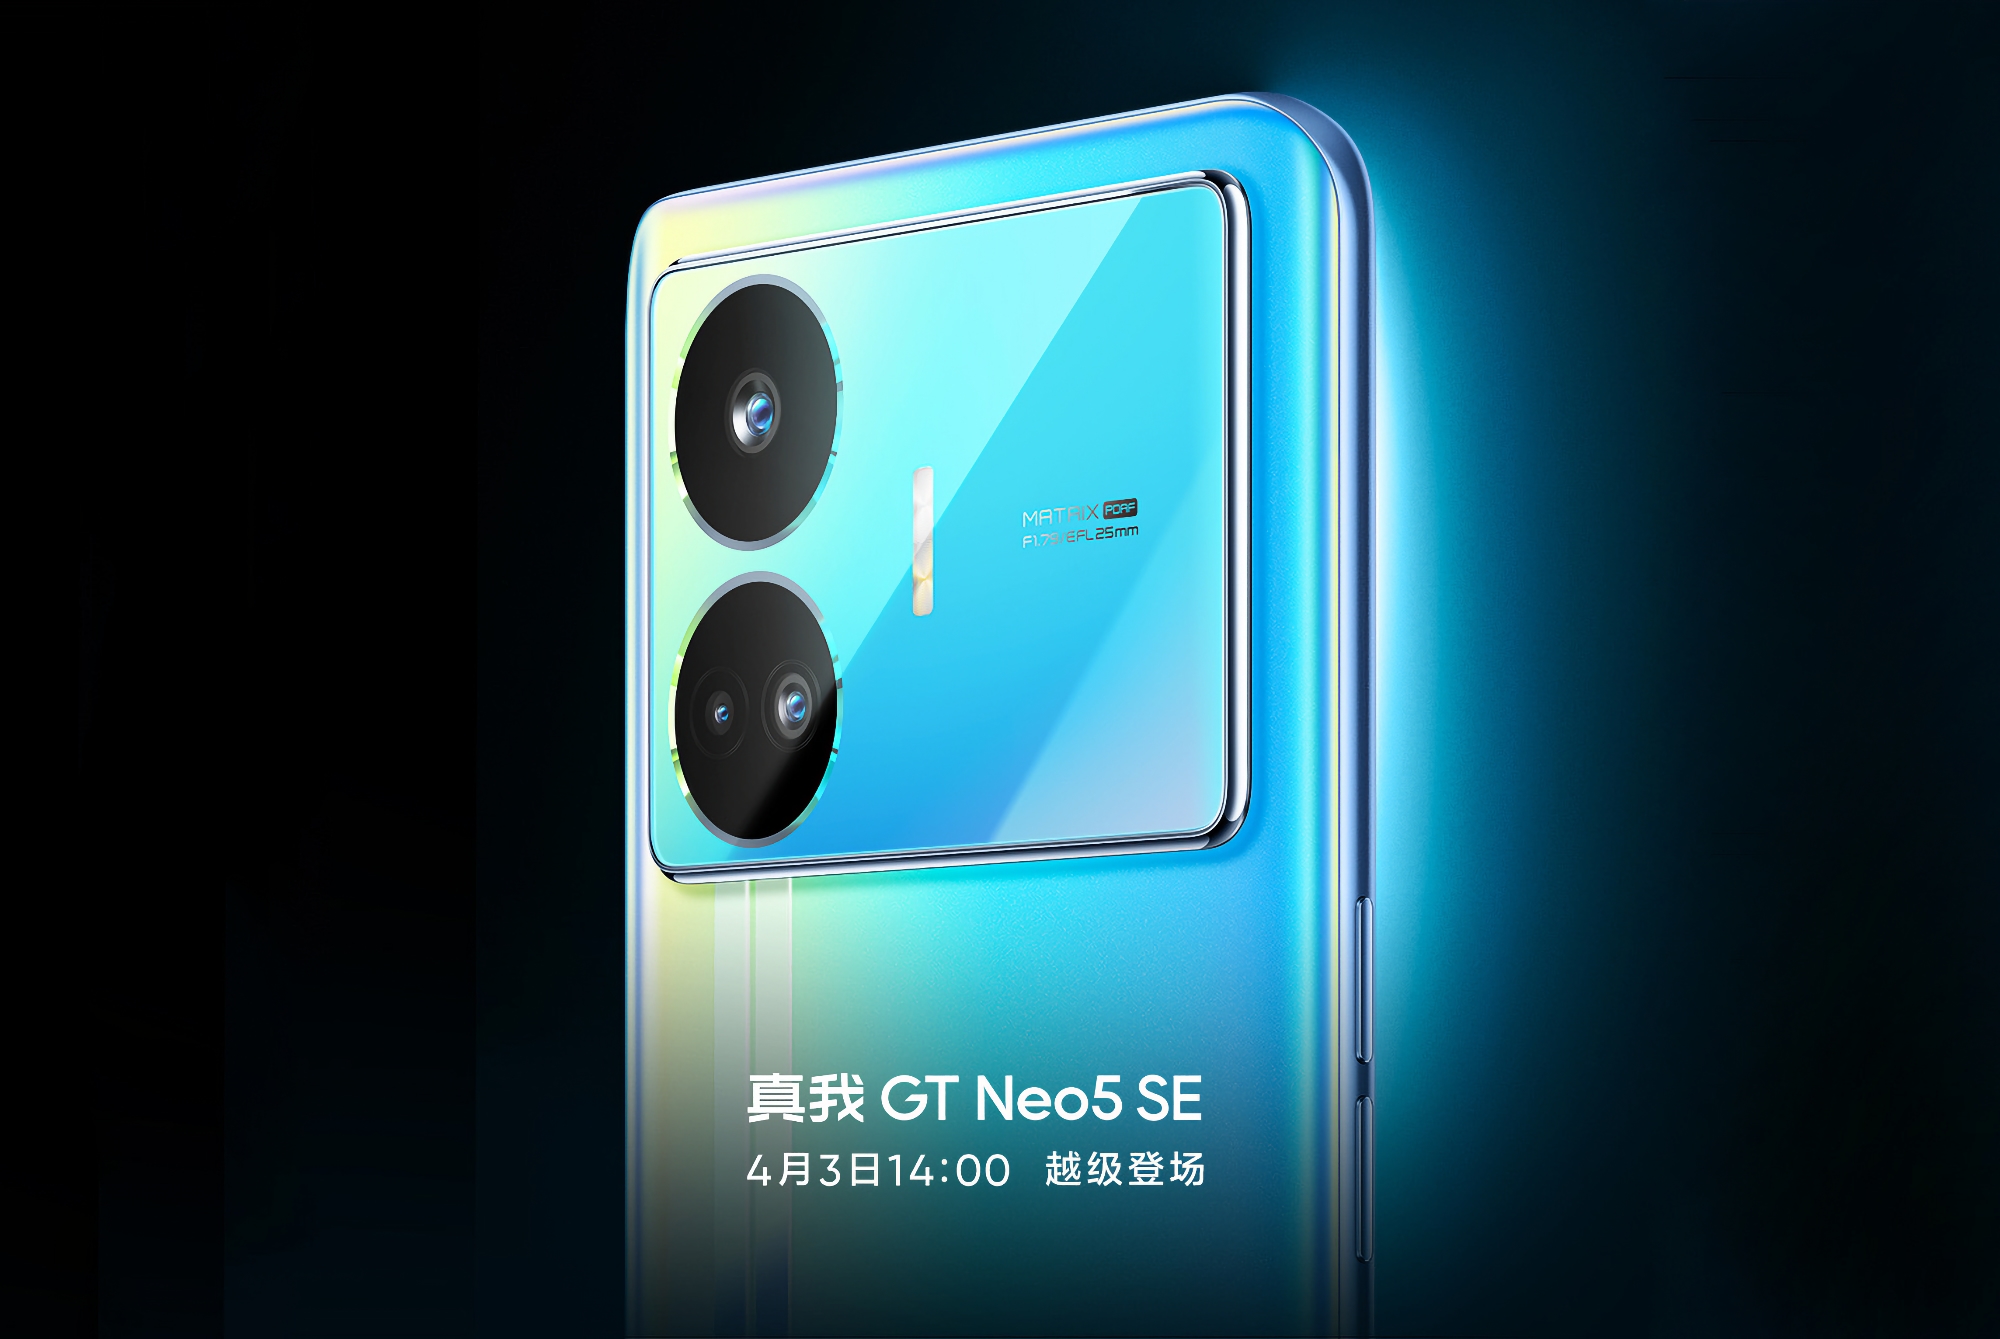 Now official: realme will unveil the realme GT Neo 5 SE with Snapdragon 7+ Gen 2 chip at the launch on 3 April